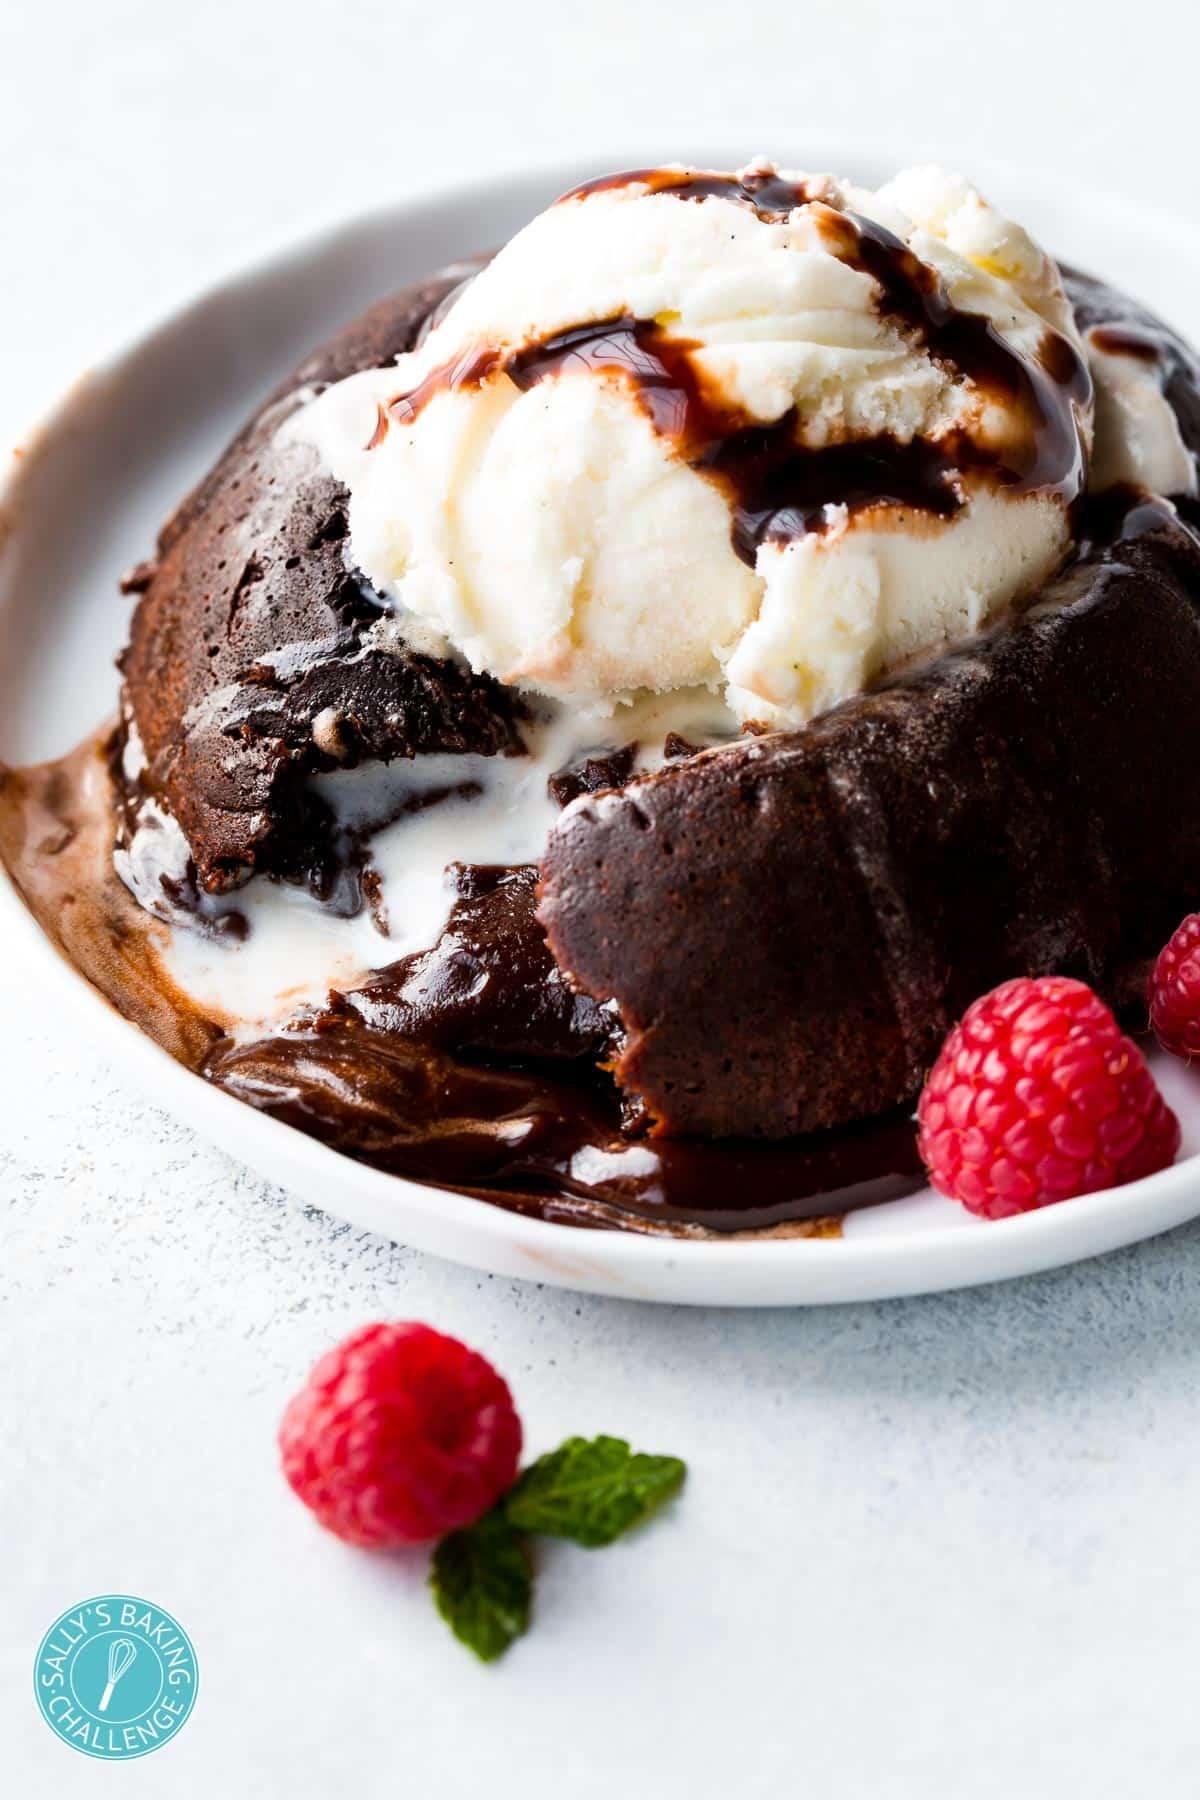 Satisfy Your Cravings with This Decadent Chocolate Lava Cake Recipe